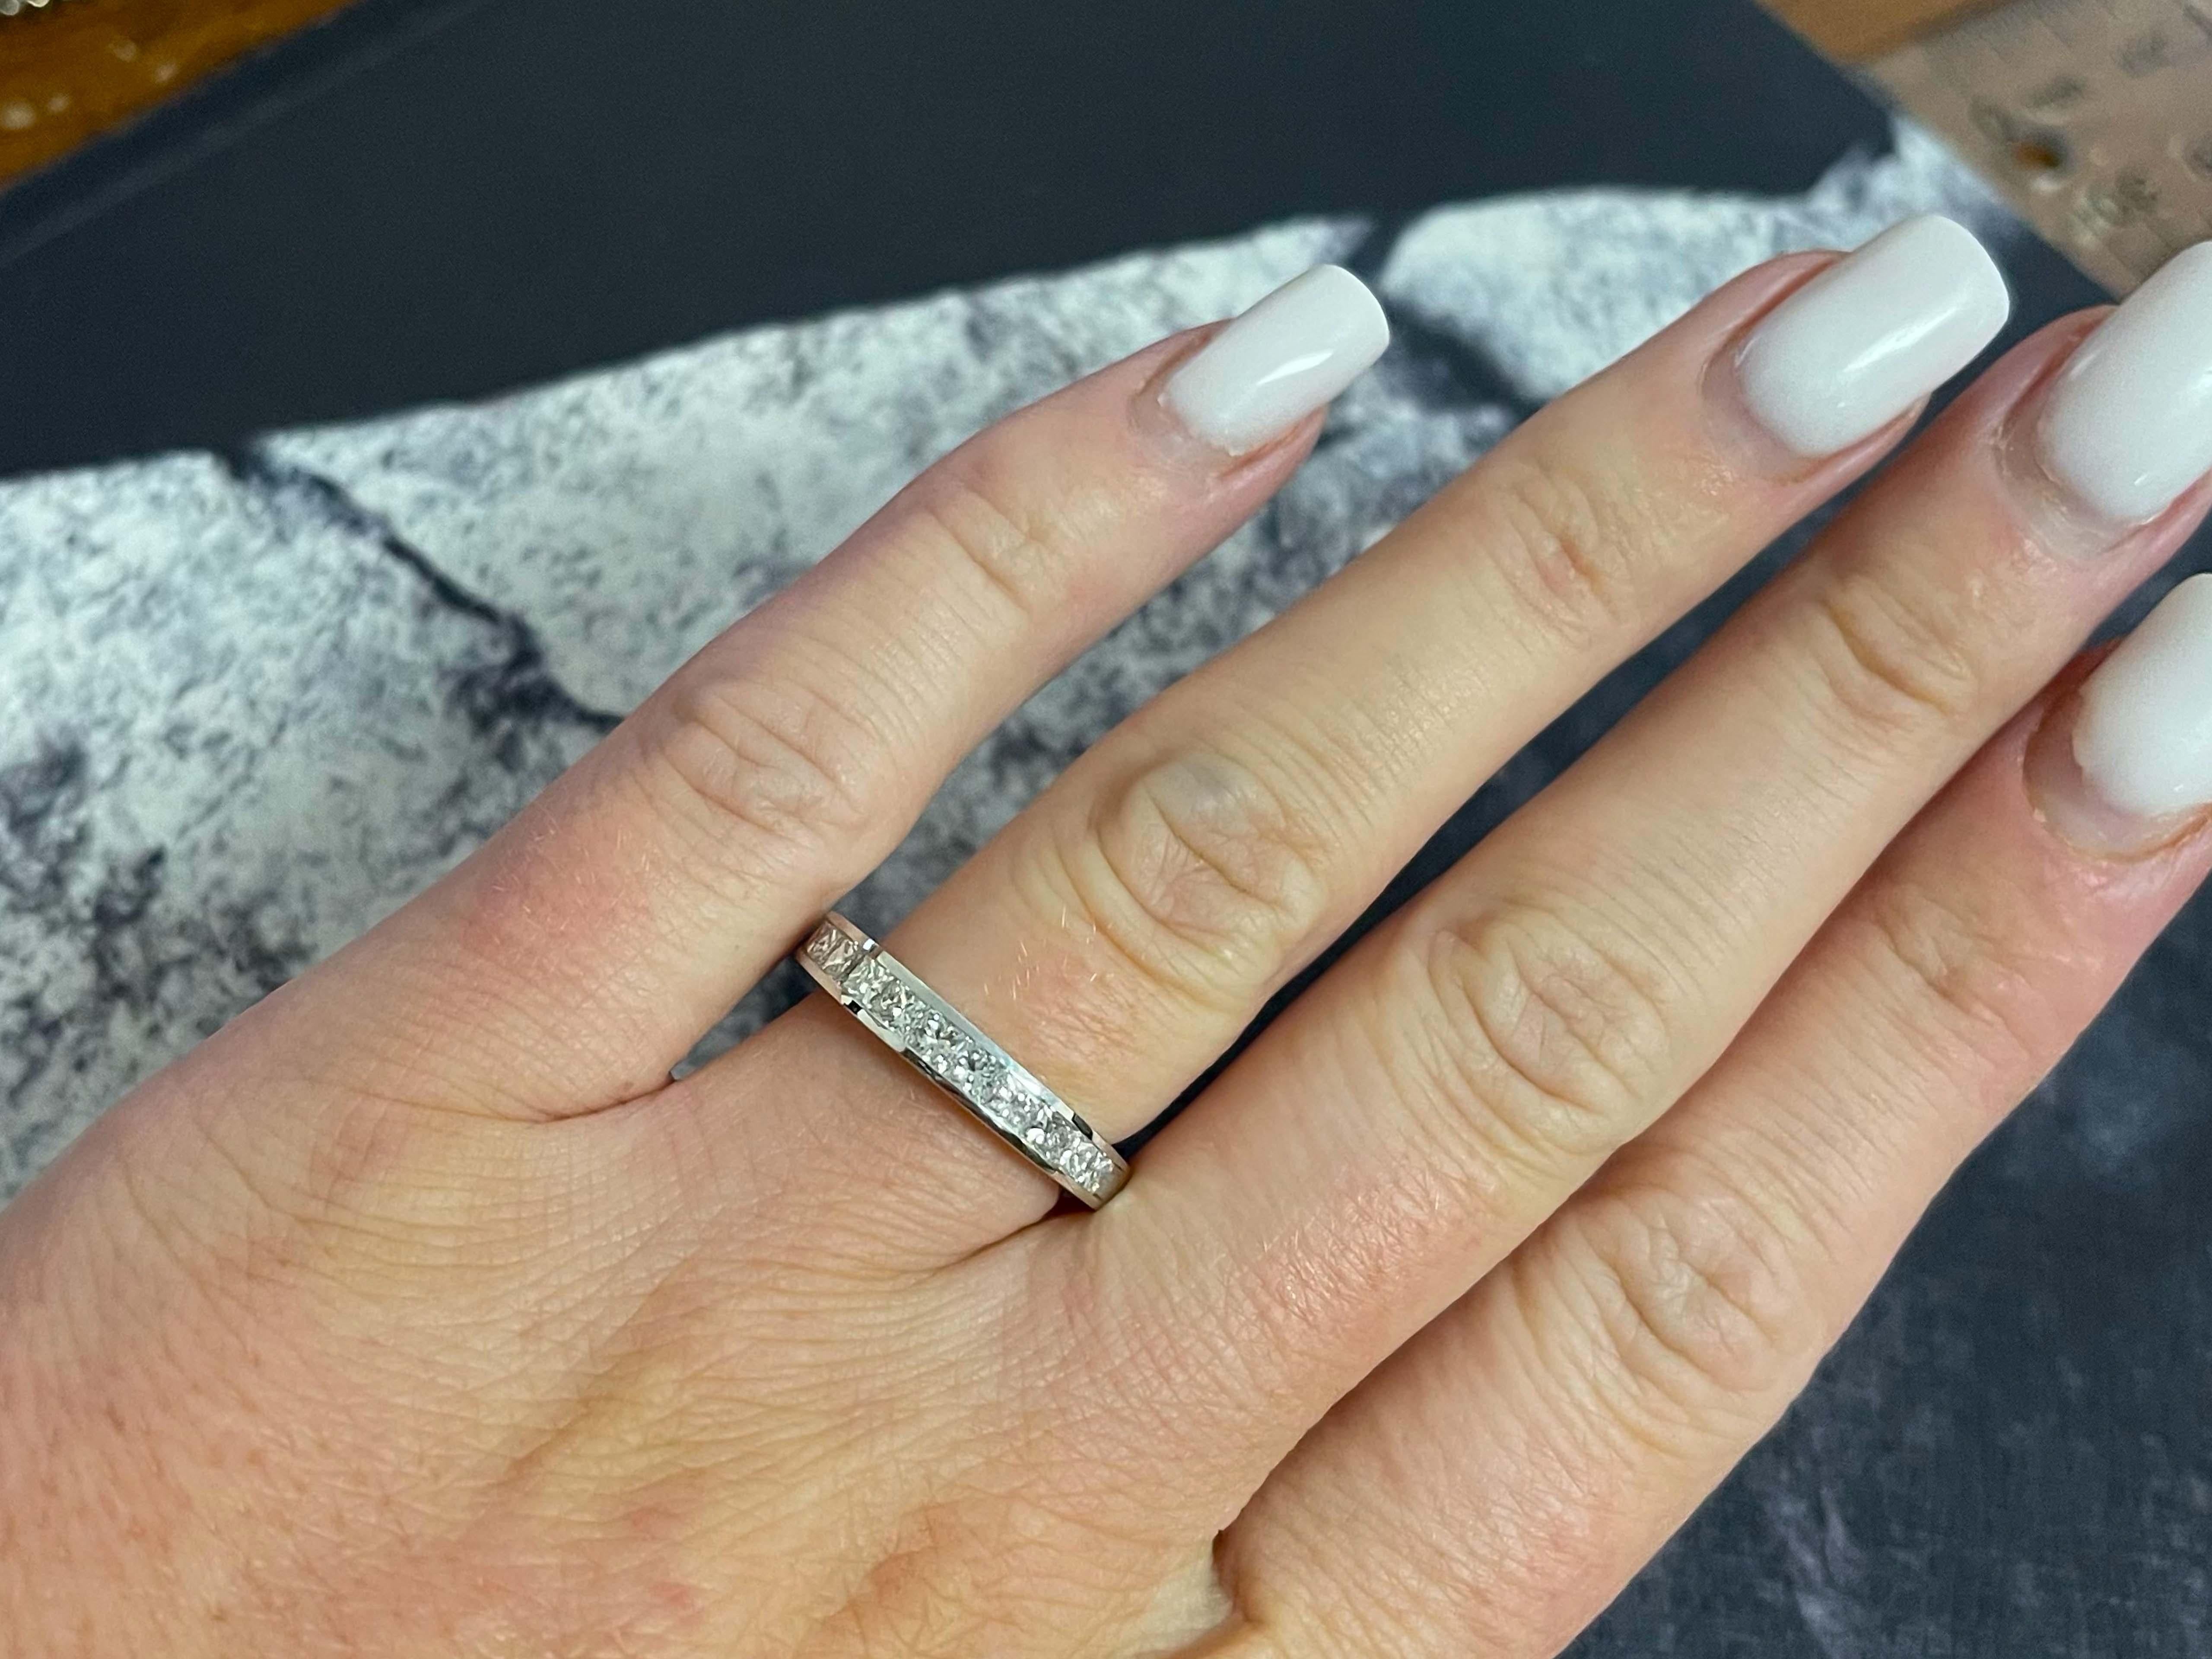 Item Specifications:

Metal: 18k White Gold

Diamond Count: 11 princess cut

Total Diamond Carat Weight: 1.07 carats 

Diamond Color: G-H

Diamond Clarity: SI

Ring Size: 6.5

Total Weight: 3.9 Grams

Stamped: 